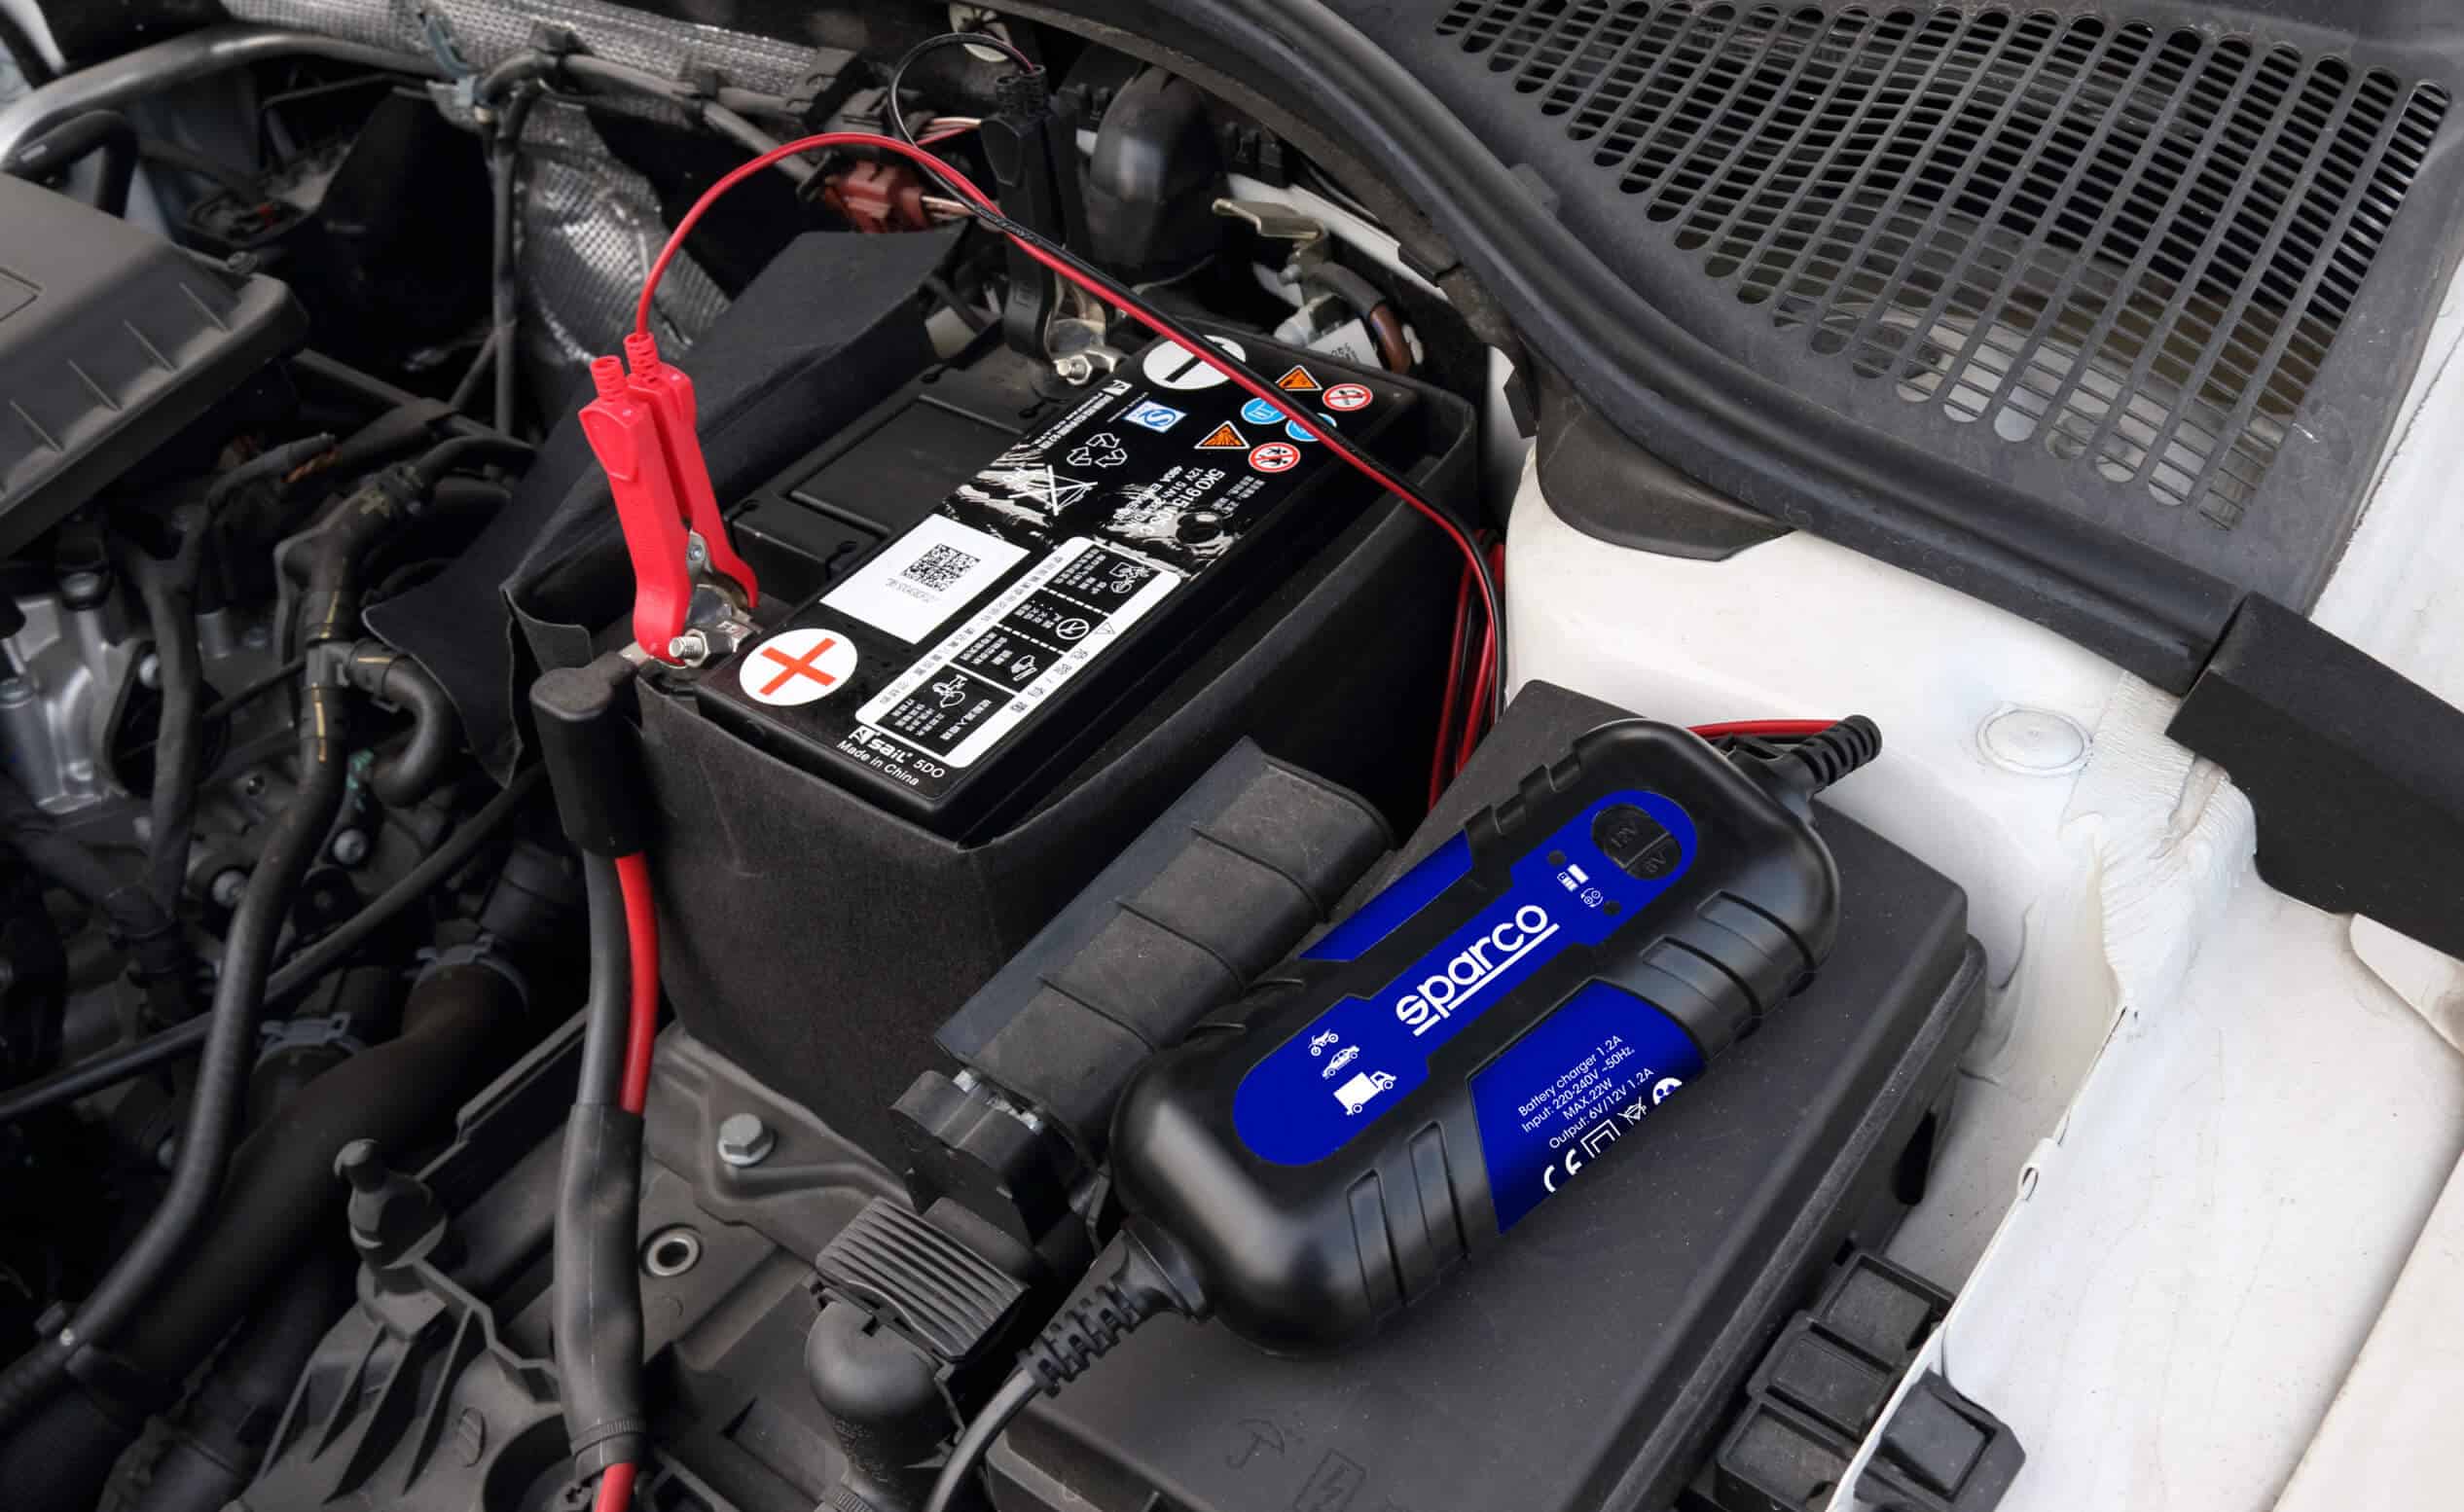 How to Charge a Car Battery: A Step-by-Step Guide - Uchanics: Auto